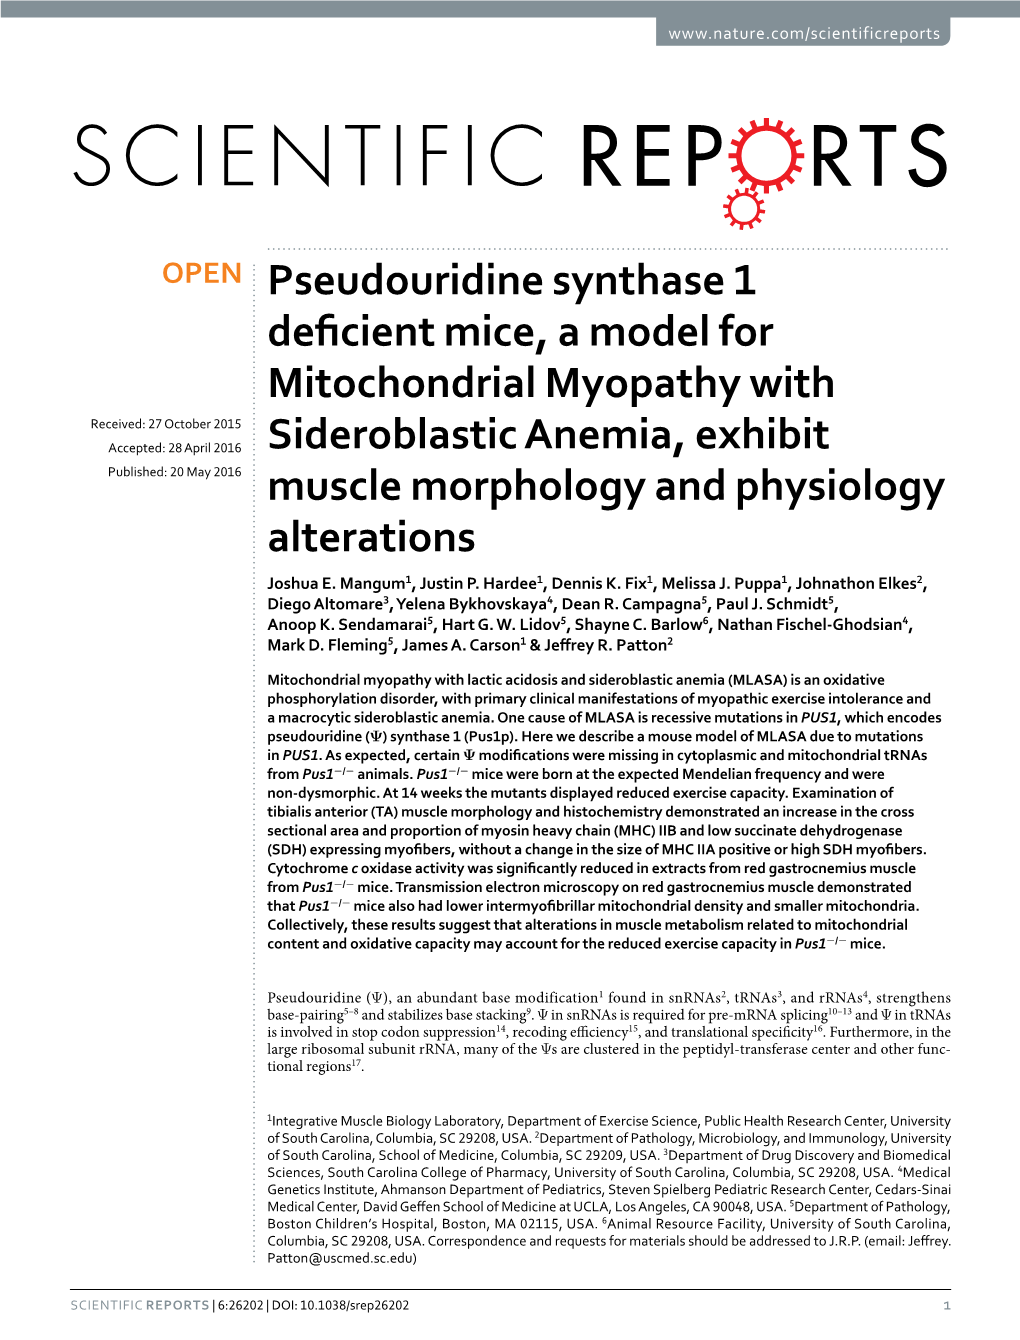 Pseudouridine Synthase 1 Deficient Mice, a Model for Mitochondrial Myopathy with Sideroblastic Anemia, Exhibit Muscle Morphology and Physiology Alterations